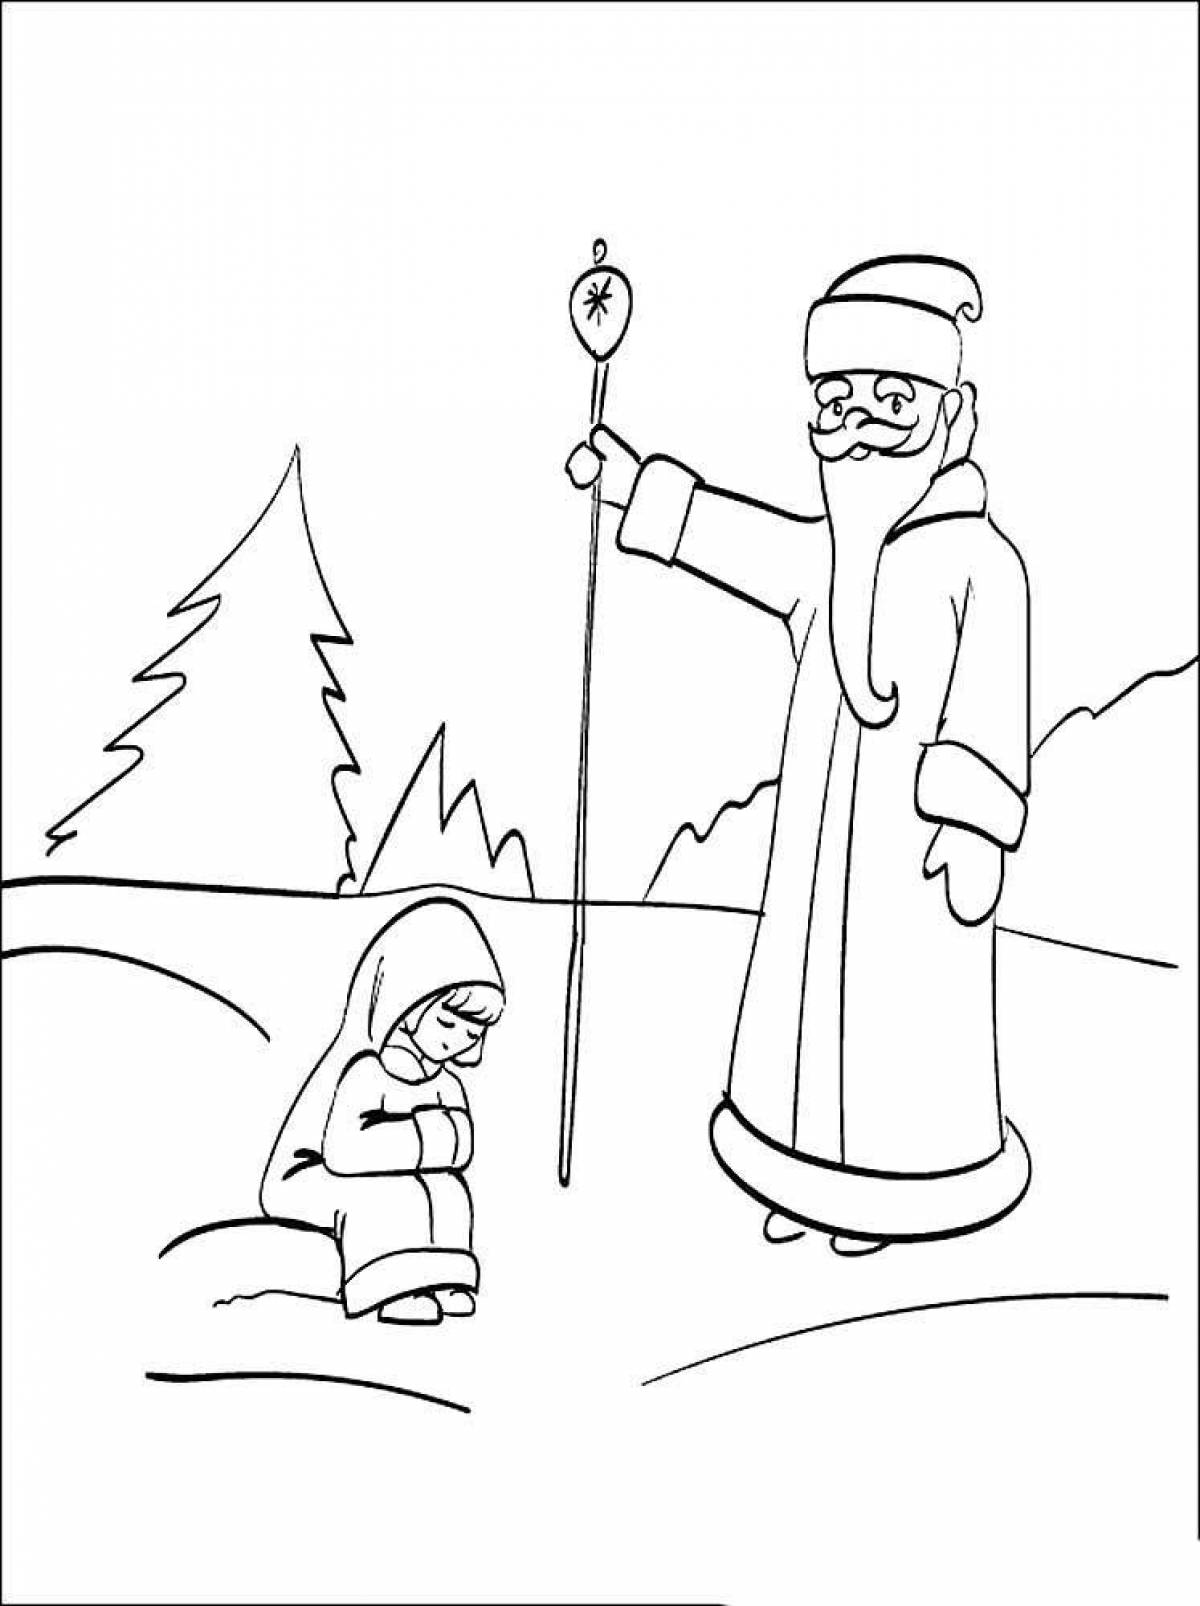 An entertaining coloring book for the fairy tale Moroz Ivanovich